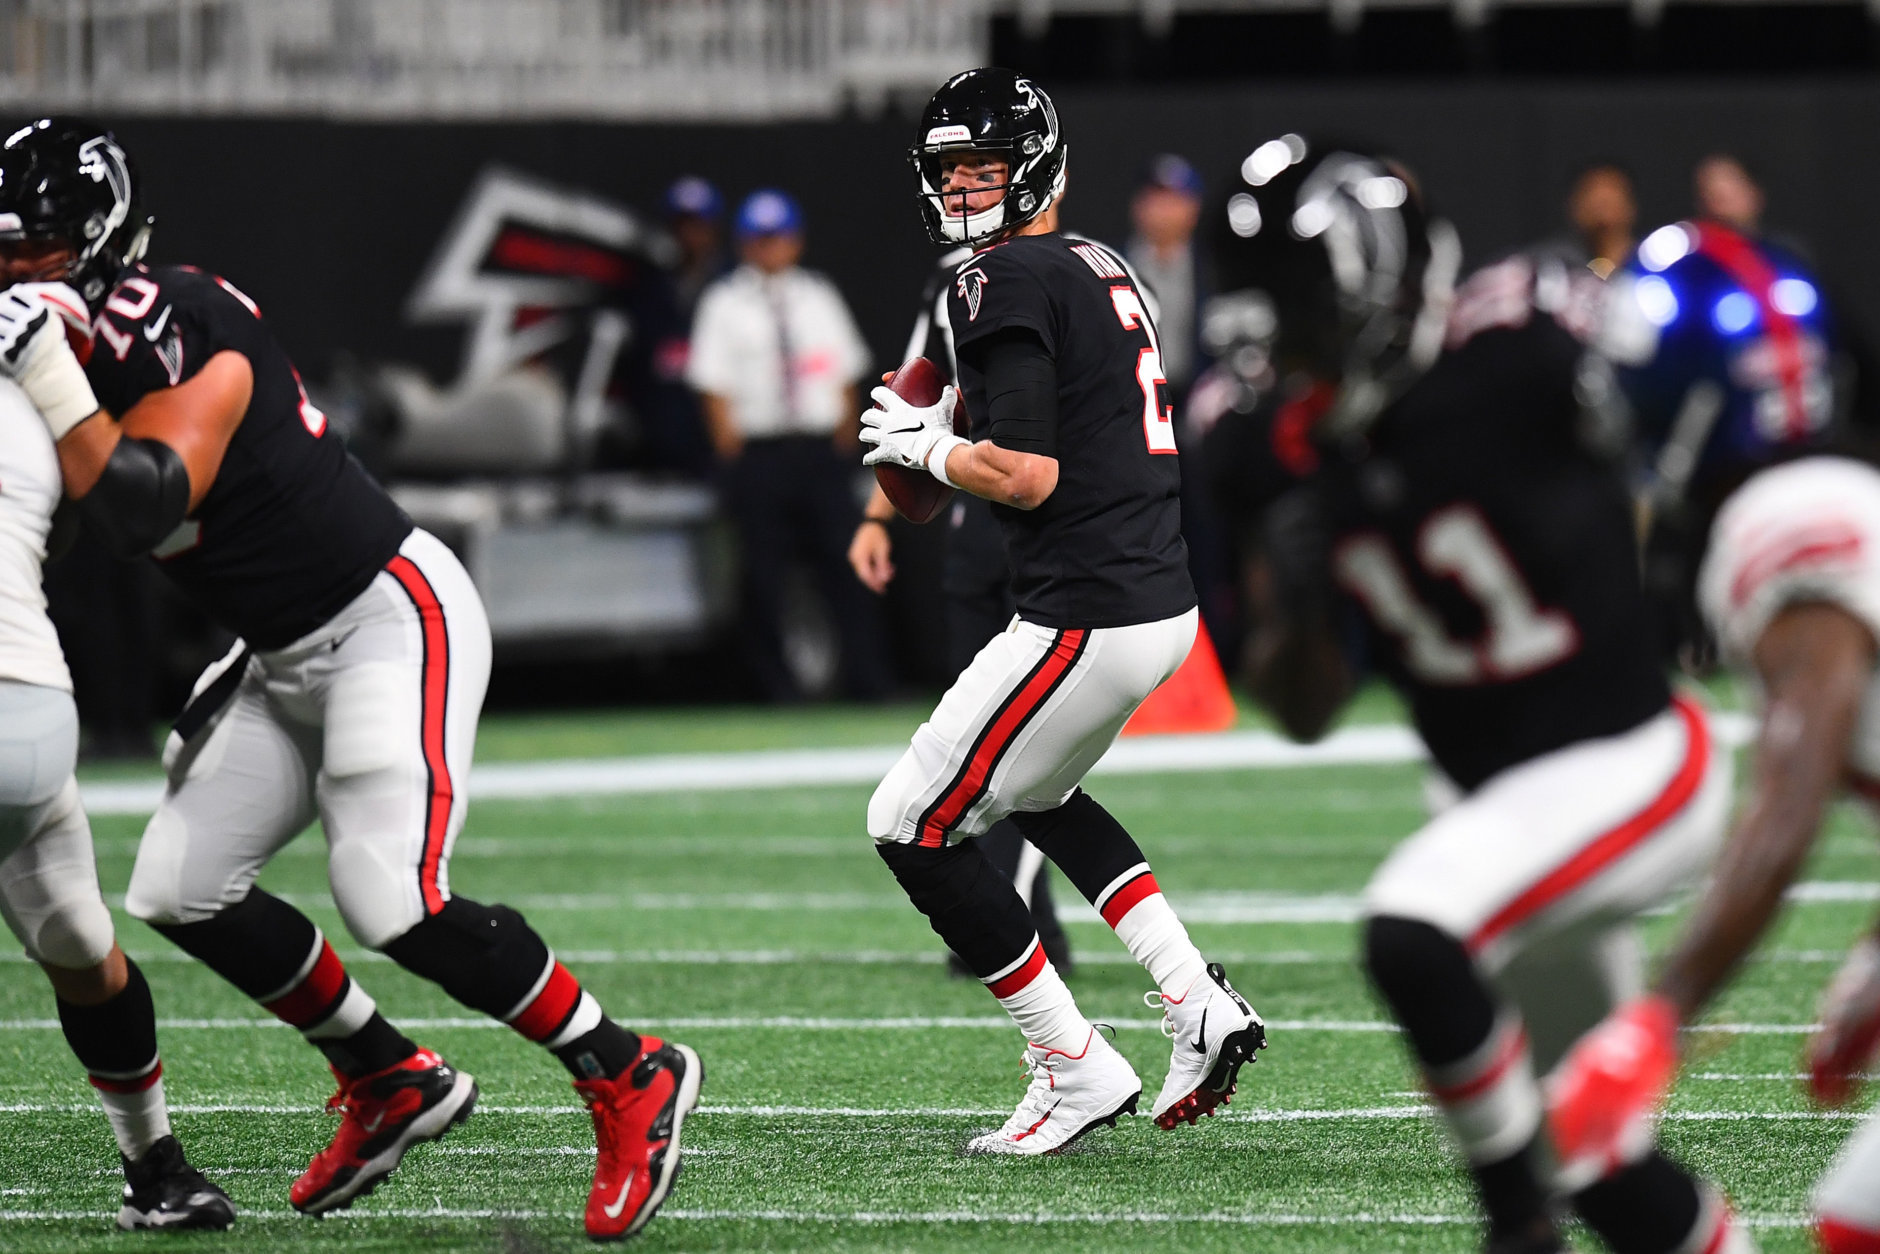 ATLANTA, GA - OCTOBER 22: Matt Ryan #2 of the Atlanta Falcons looks to pass during the first quarter against the New York Giants at Mercedes-Benz Stadium on October 22, 2018 in Atlanta, Georgia. (Photo by Scott Cunningham/Getty Images)